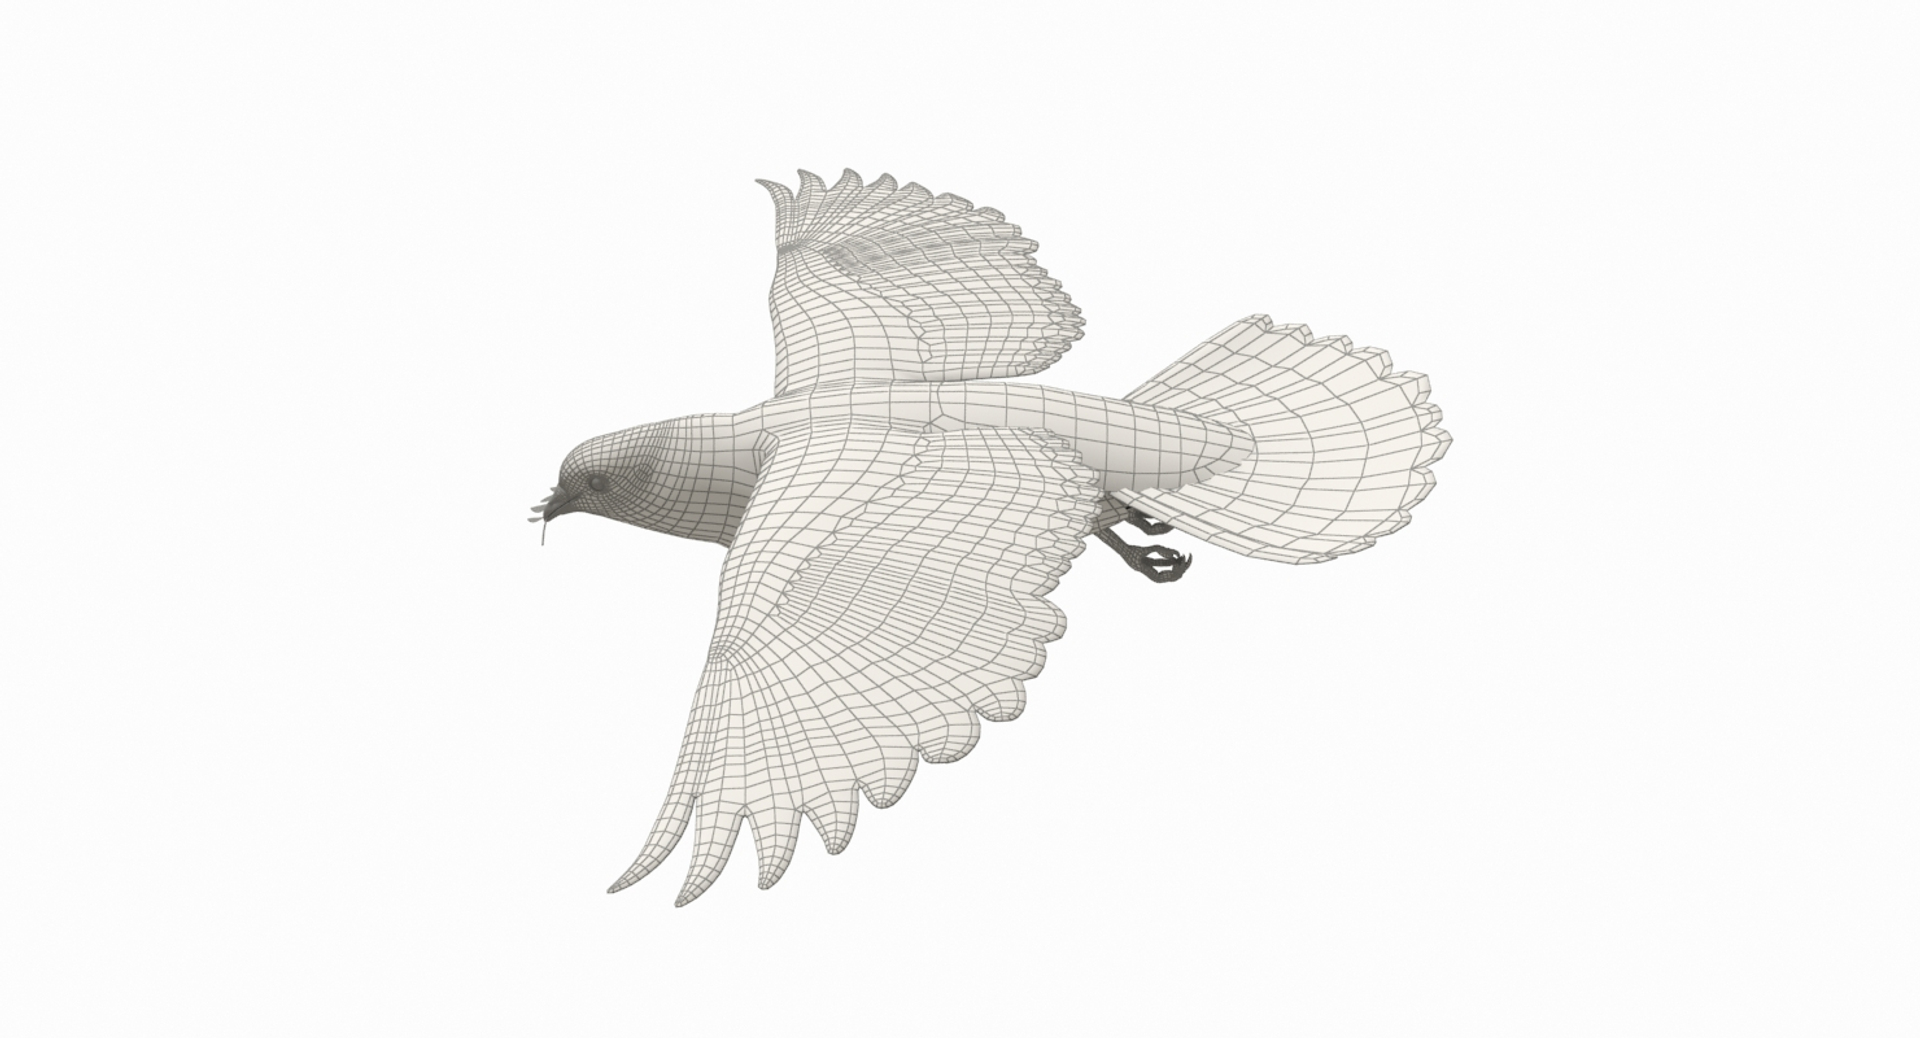 dove flying animation